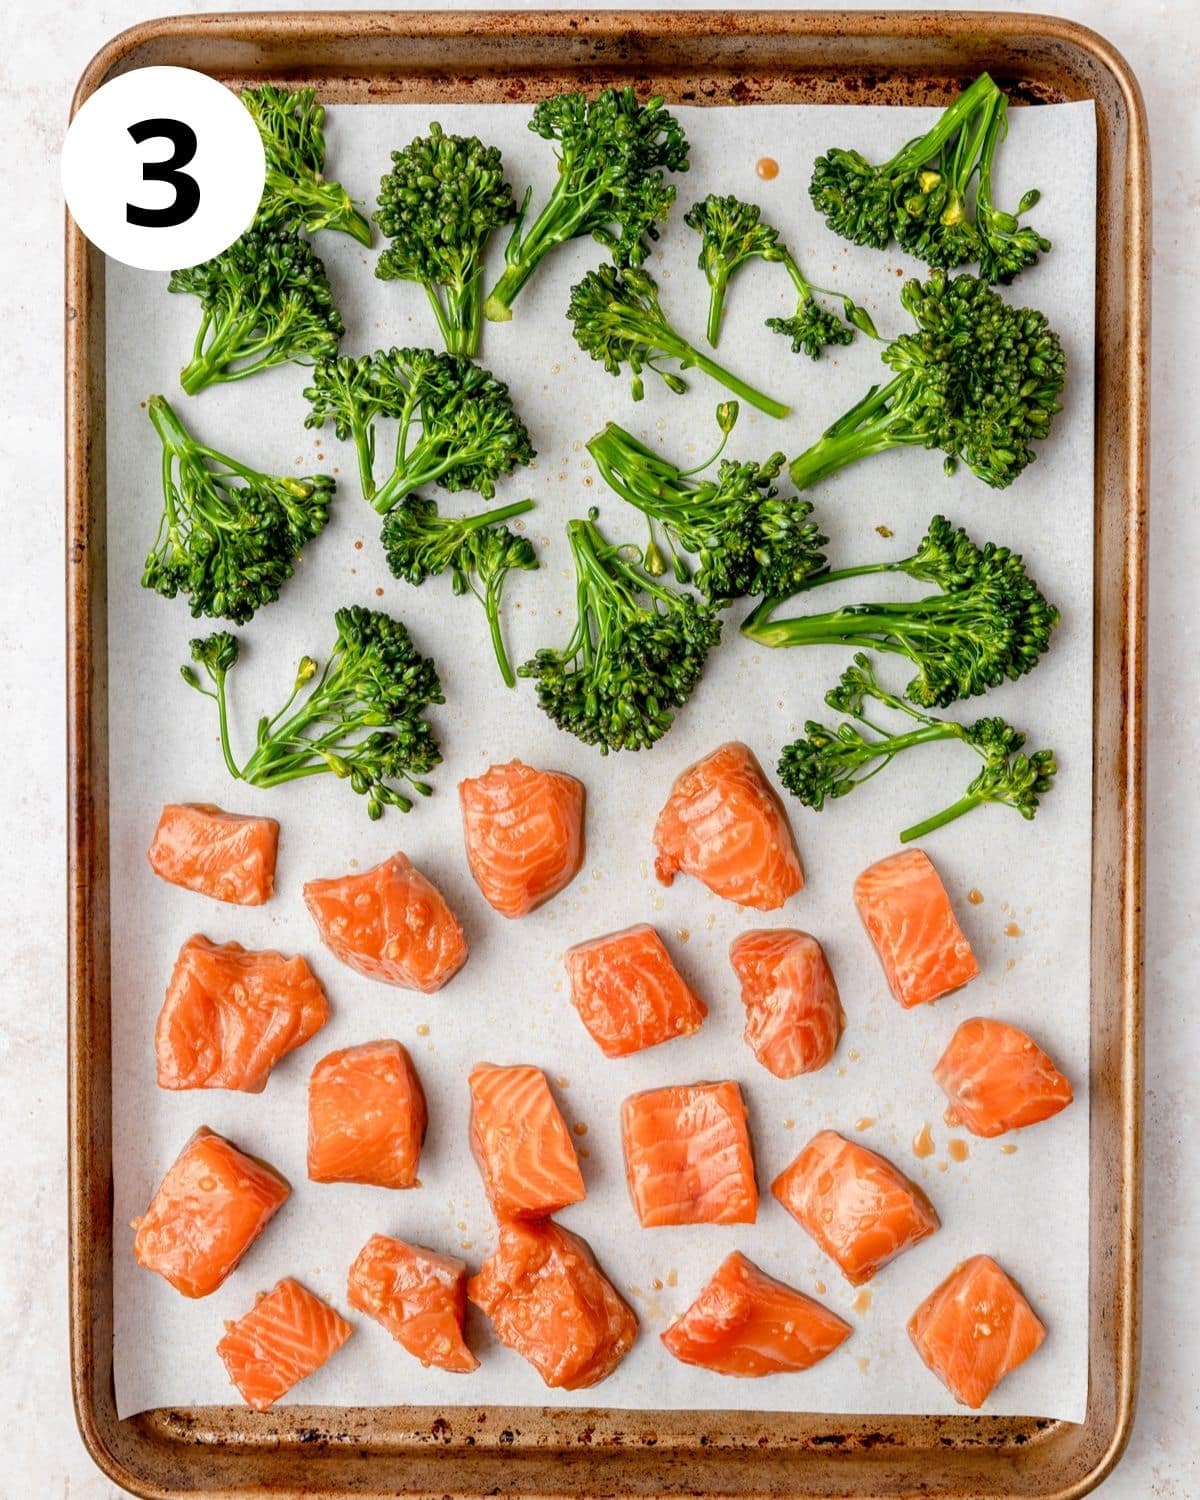 baking sheet with salmon and broccoli before roasting.